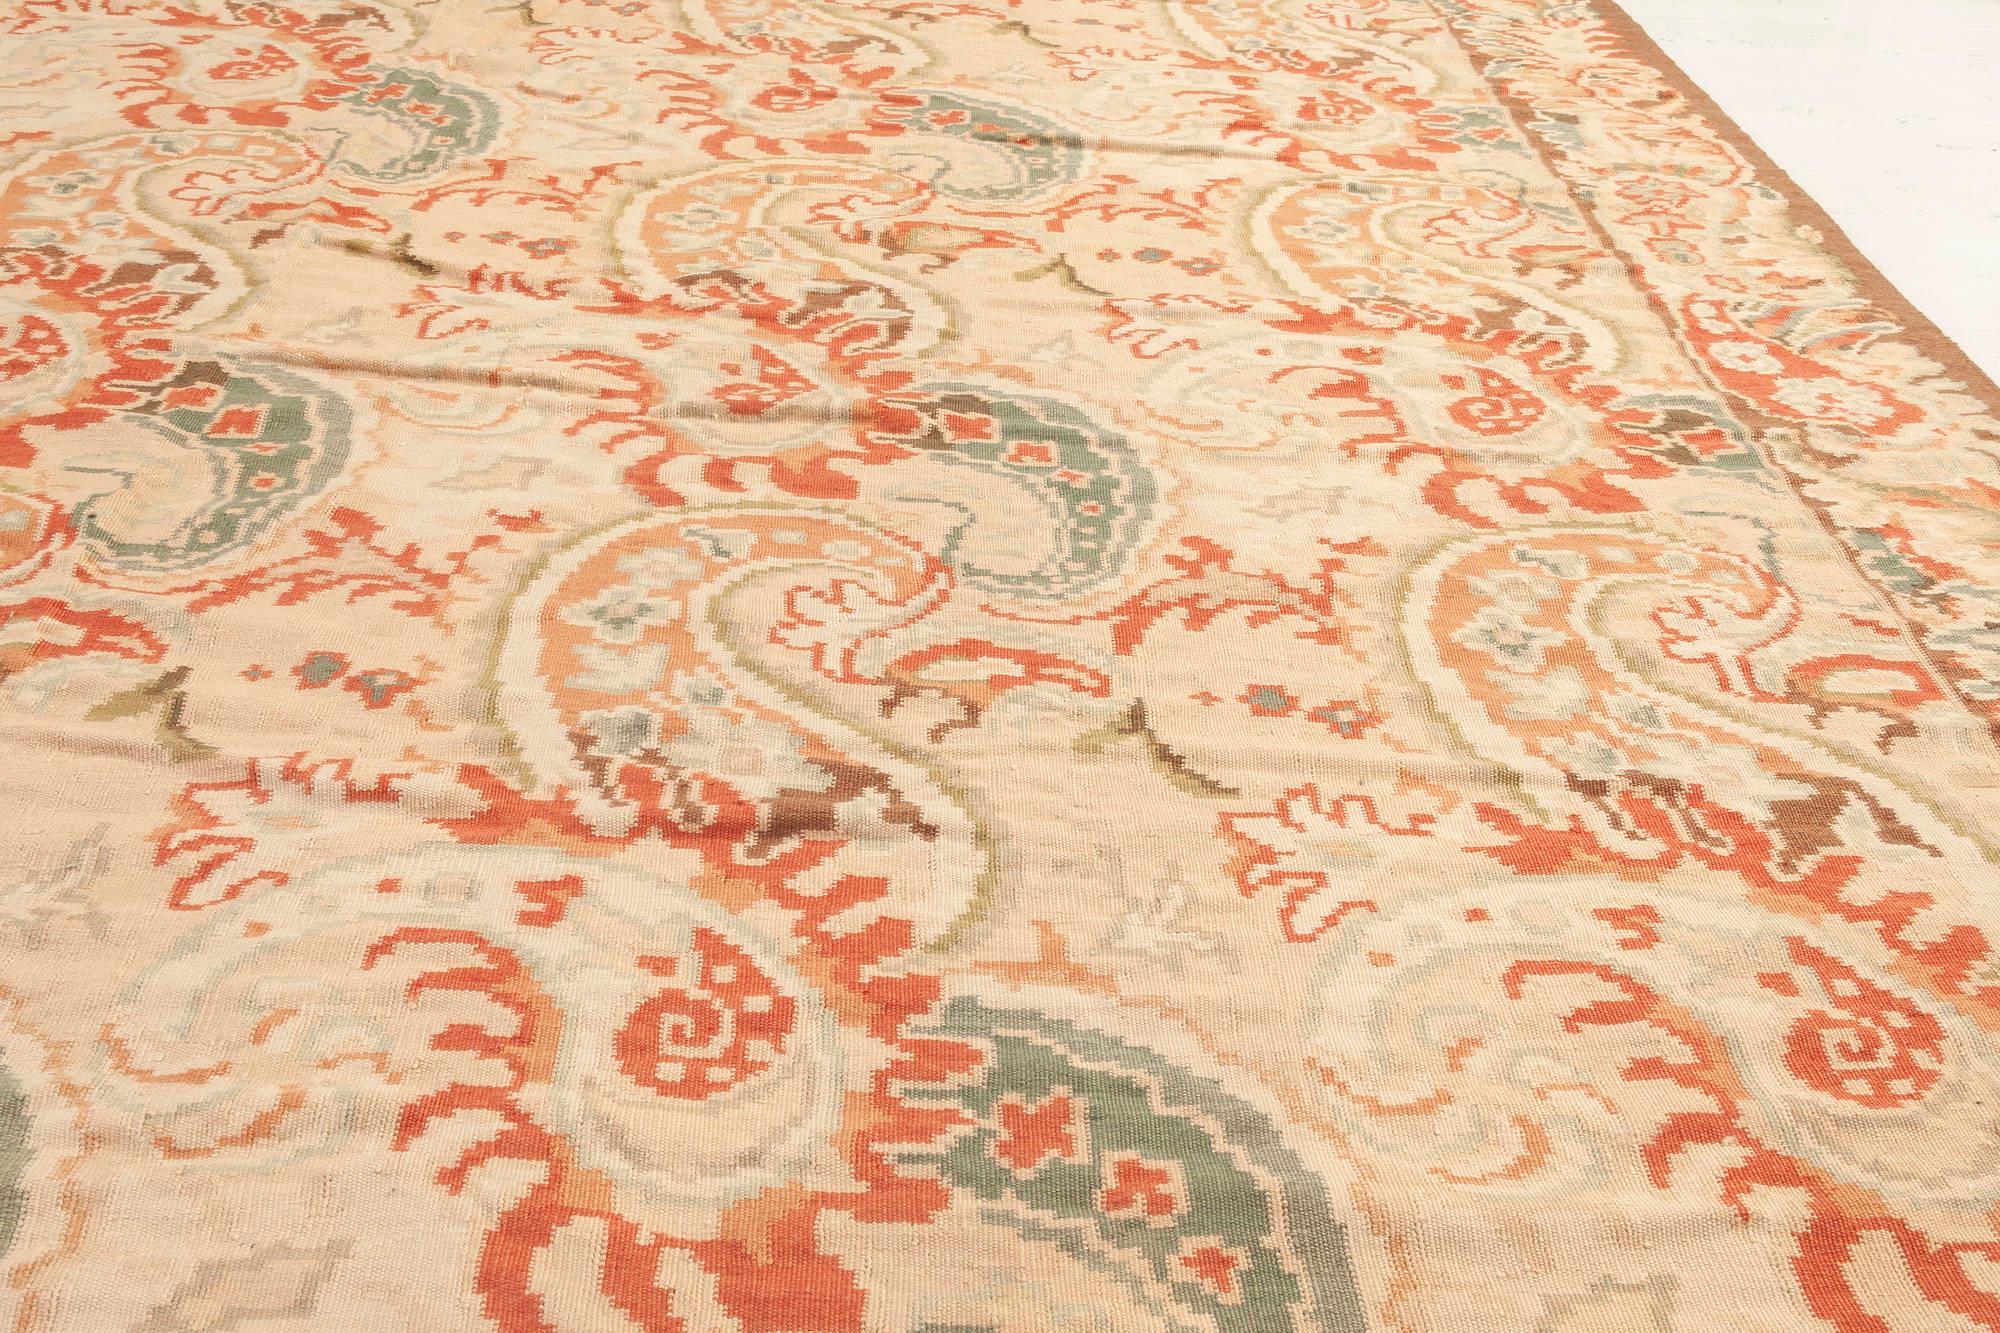 Hand-Knotted Contemporary Oversized Floral Bessarabian Inspired Rug by Doris Leslie Blau For Sale